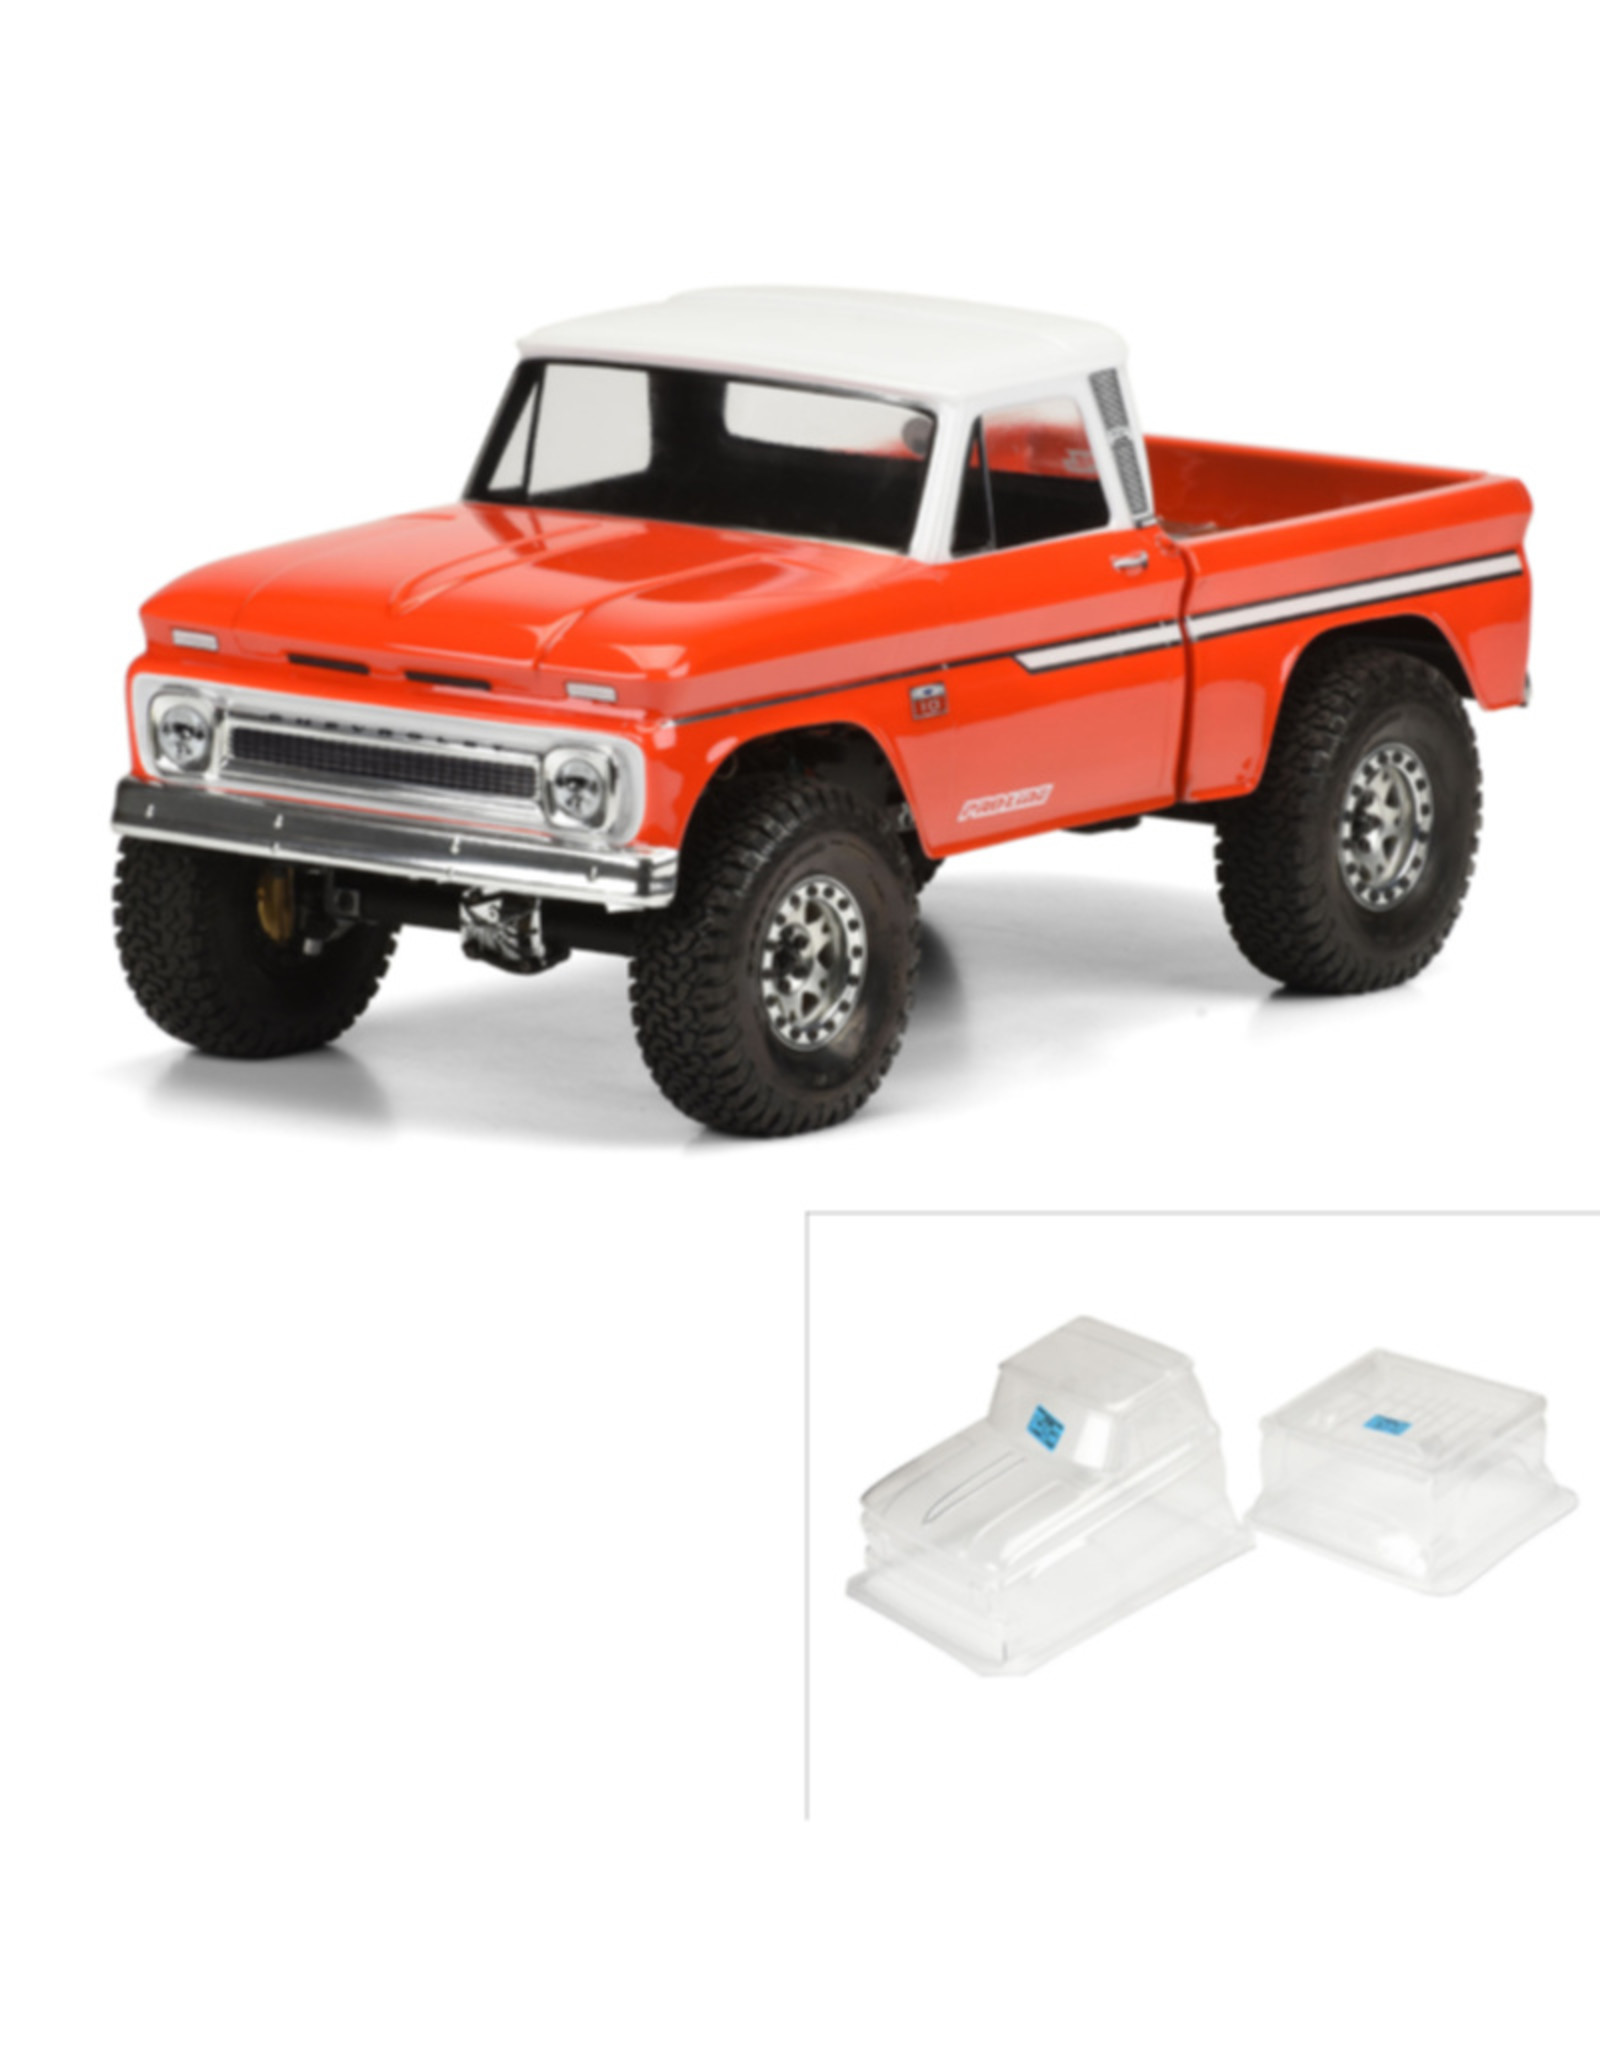 Pro-Line Racing PRO348300 1966 Chevy C-10 Clear Body Trail Honcho